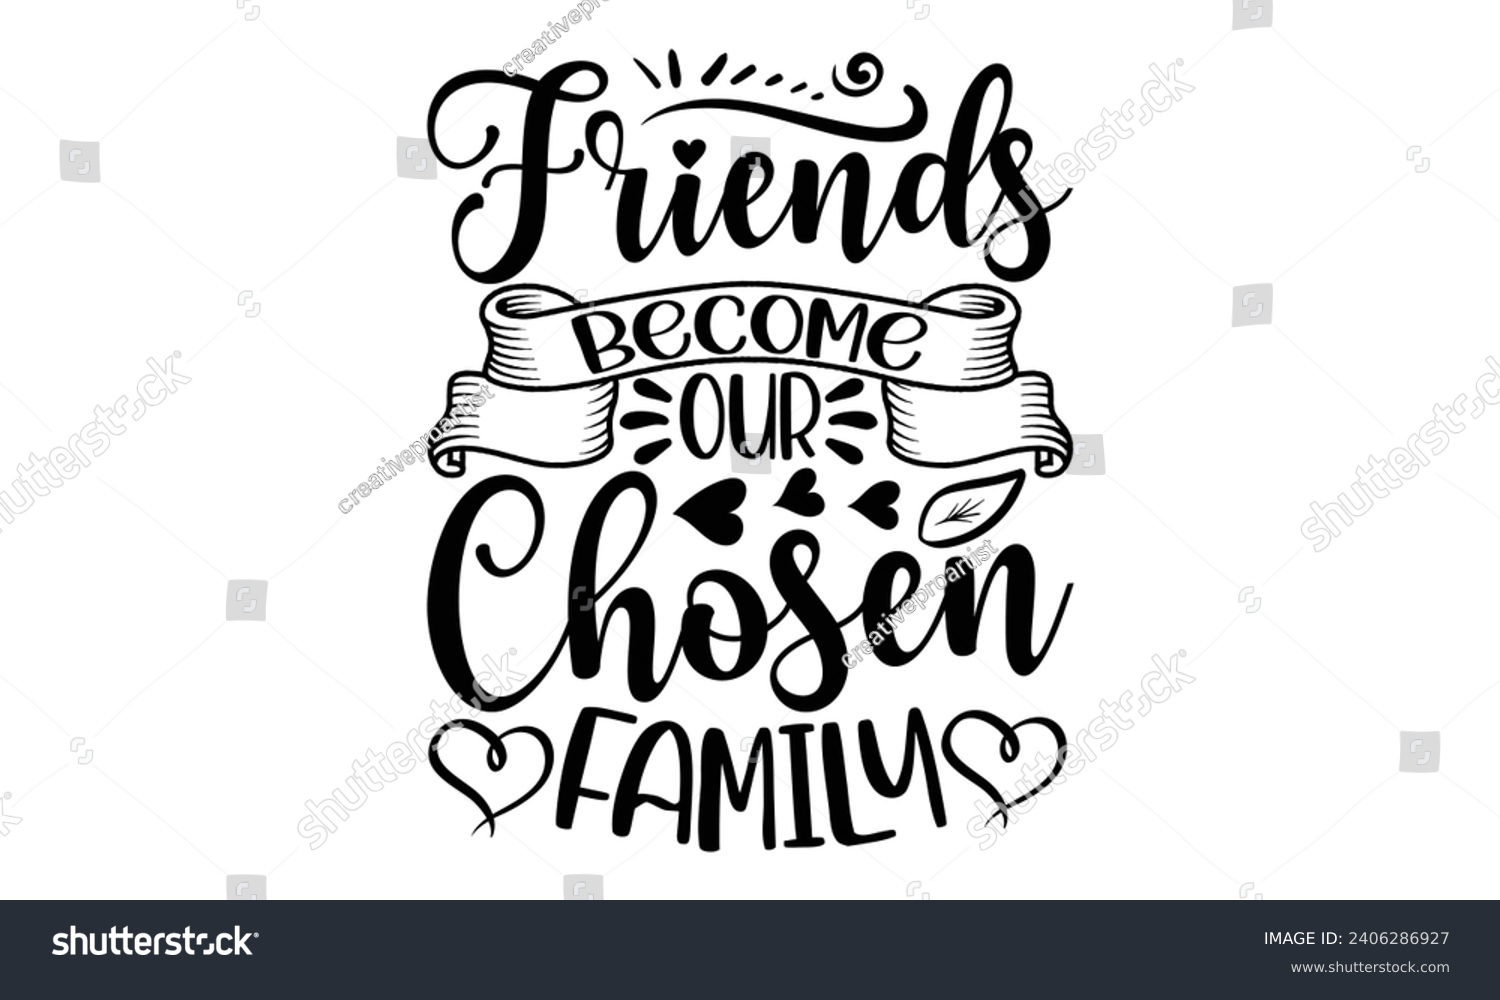 SVG of Friends Become Our Chosen Family- Best friends t- shirt design, Hand drawn vintage illustration with hand-lettering and decoration elements, greeting card template with typography text svg